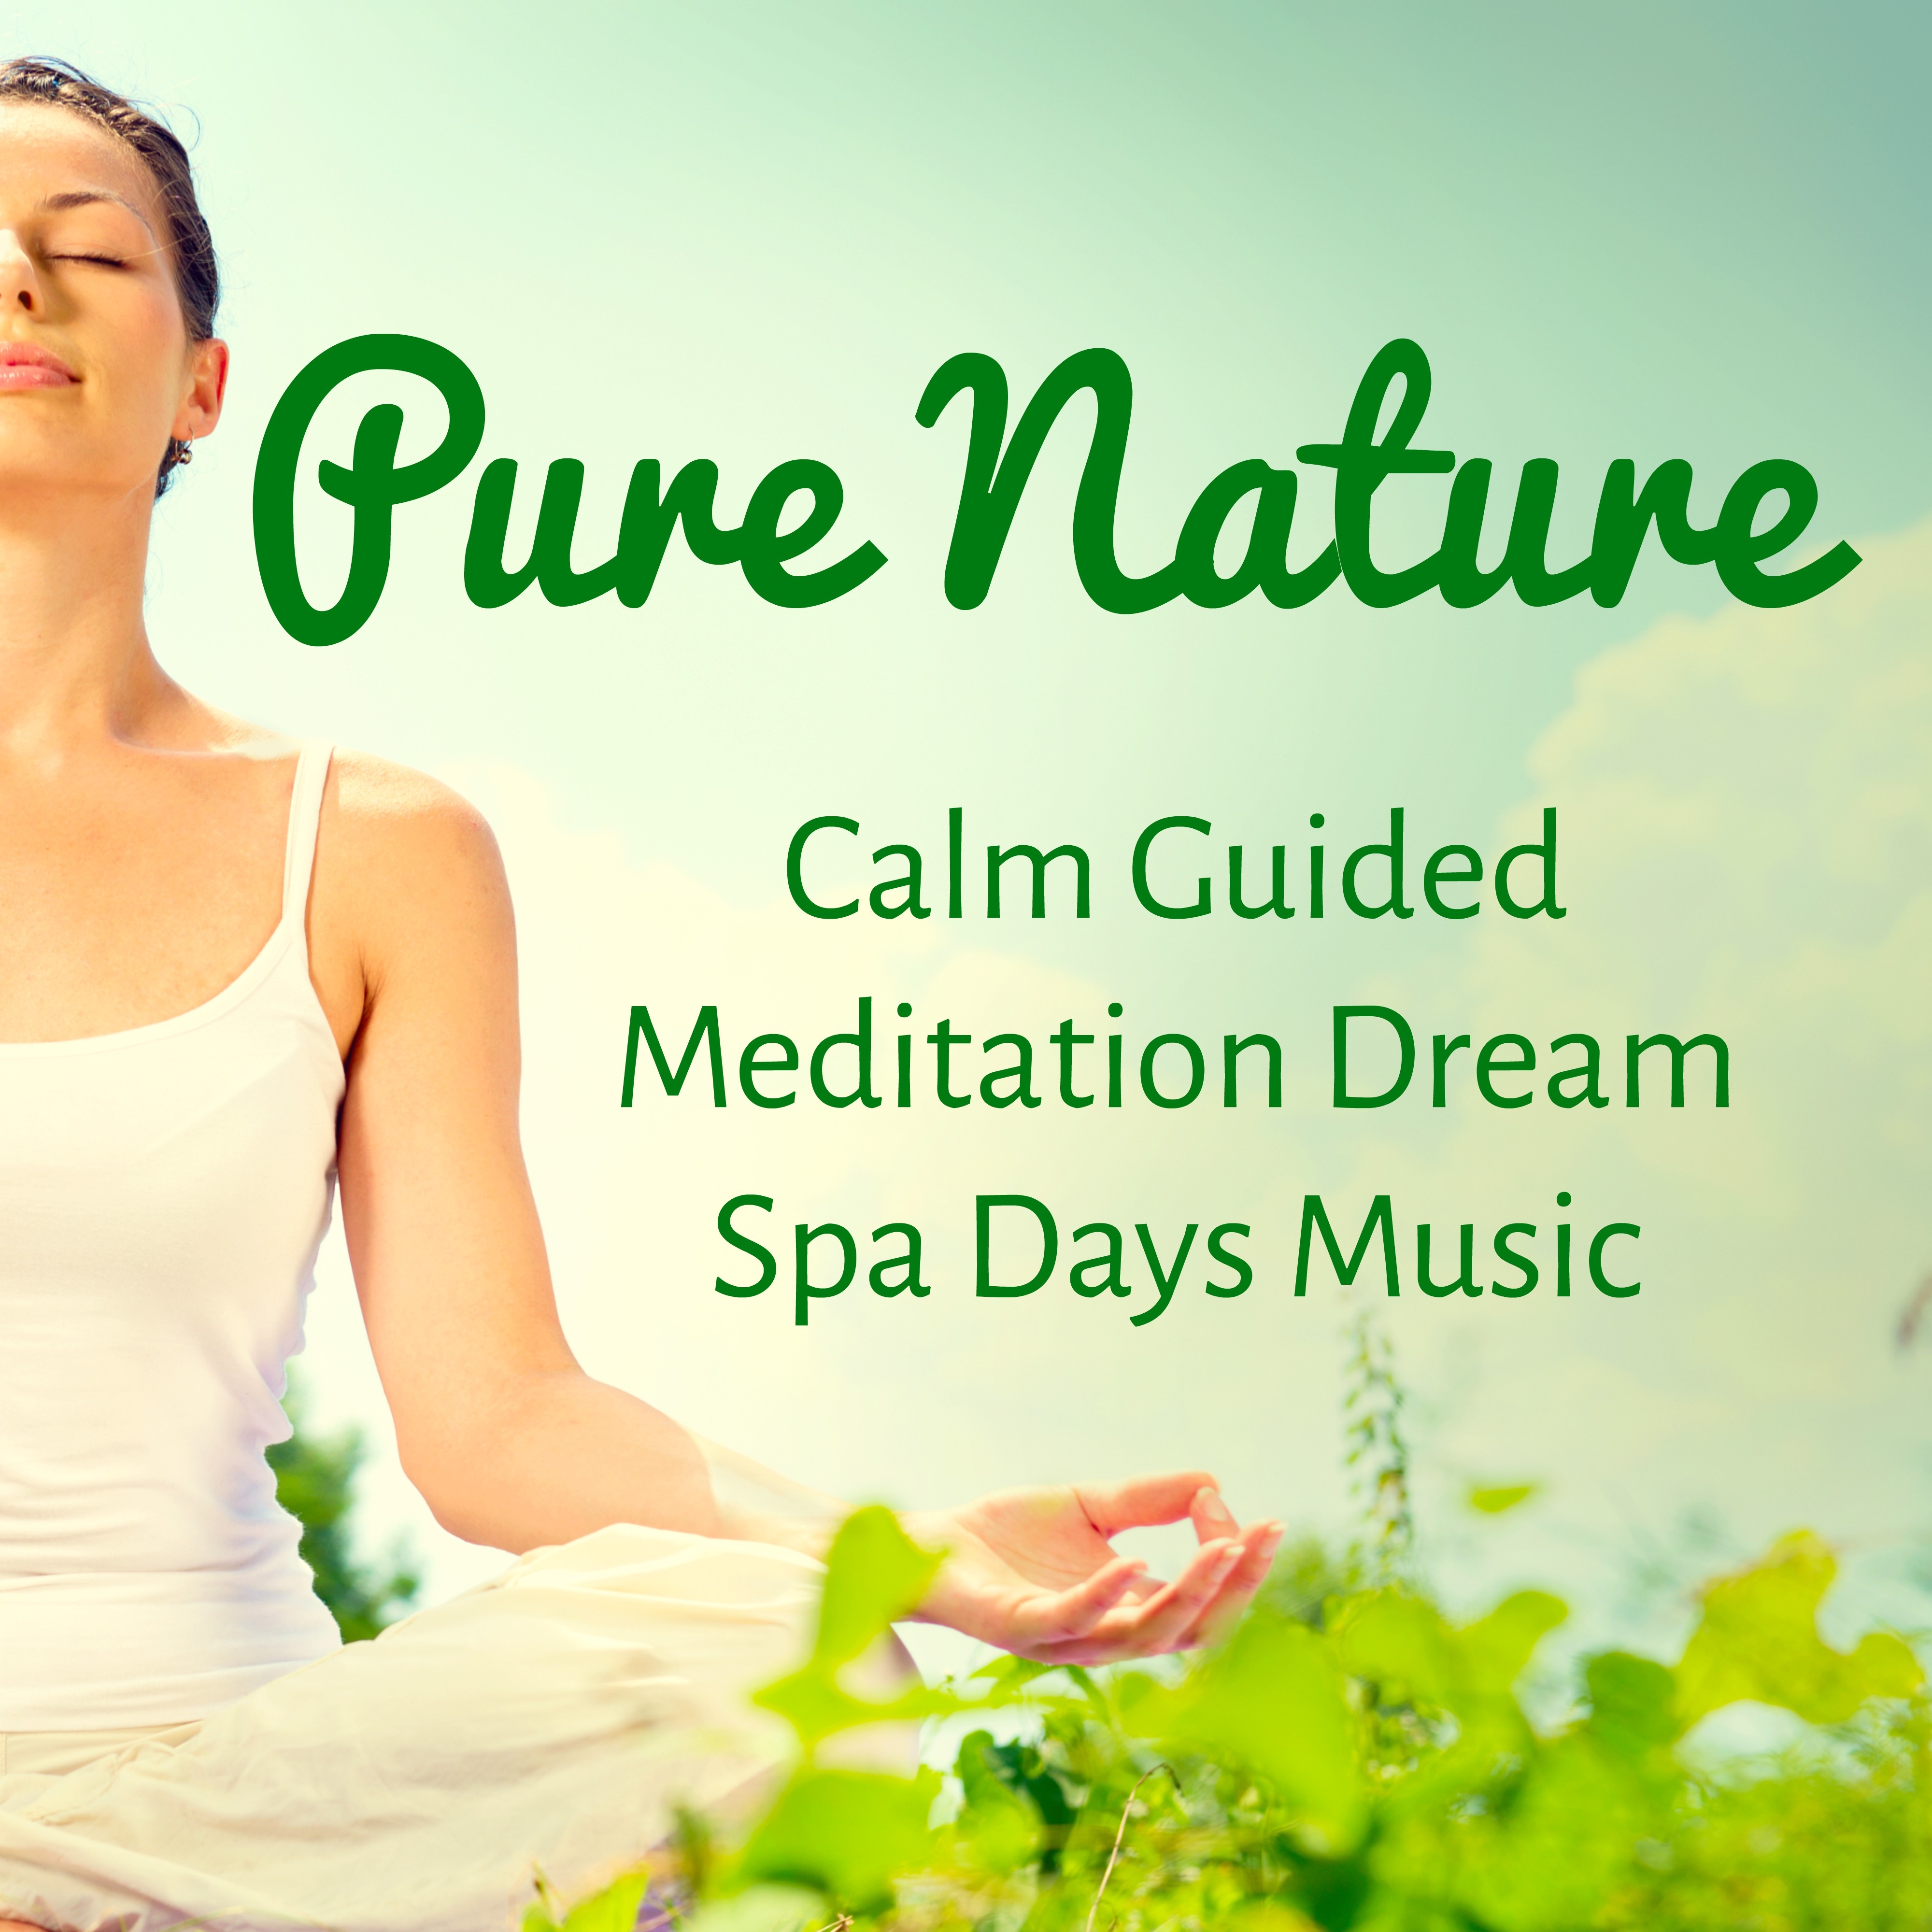 Pure Nature - Calm Guided Meditation Dream Spa Days Music to Increase Brain Power Spiritual Training and Zen Style